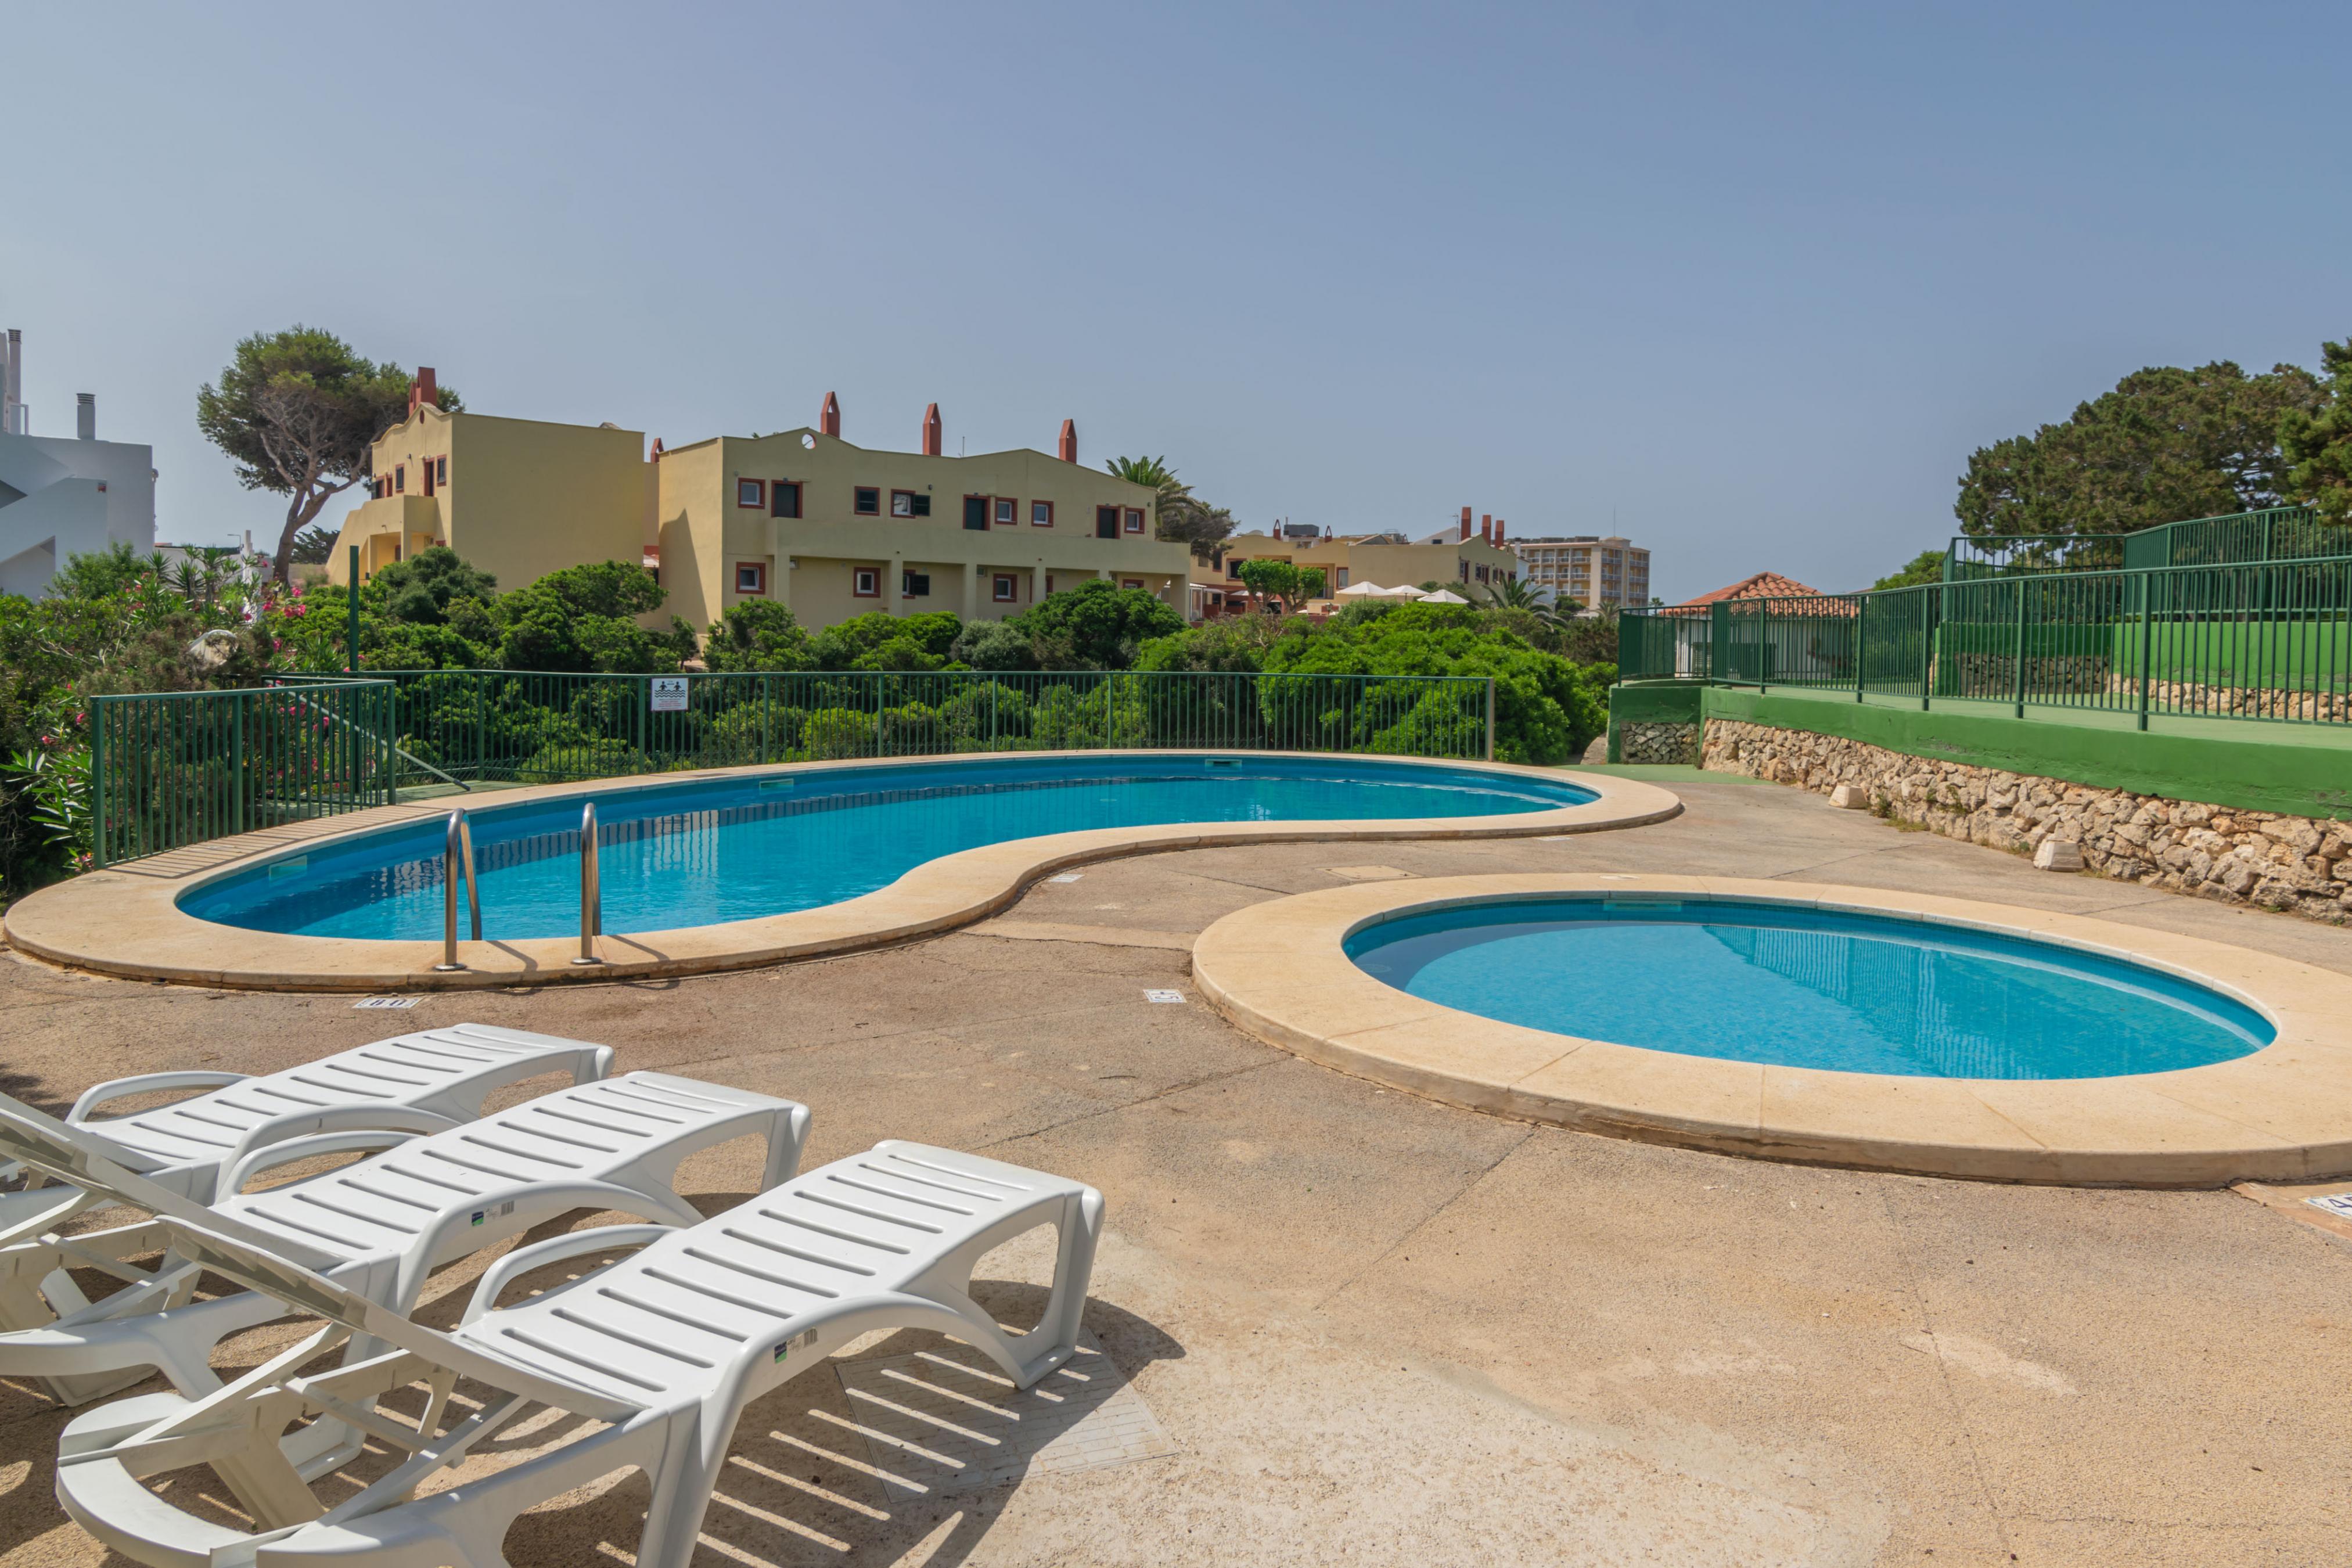 Property Image 2 - BINIFORCAT 11 - Charming apartment with shared pool located 250 meters from the beach.